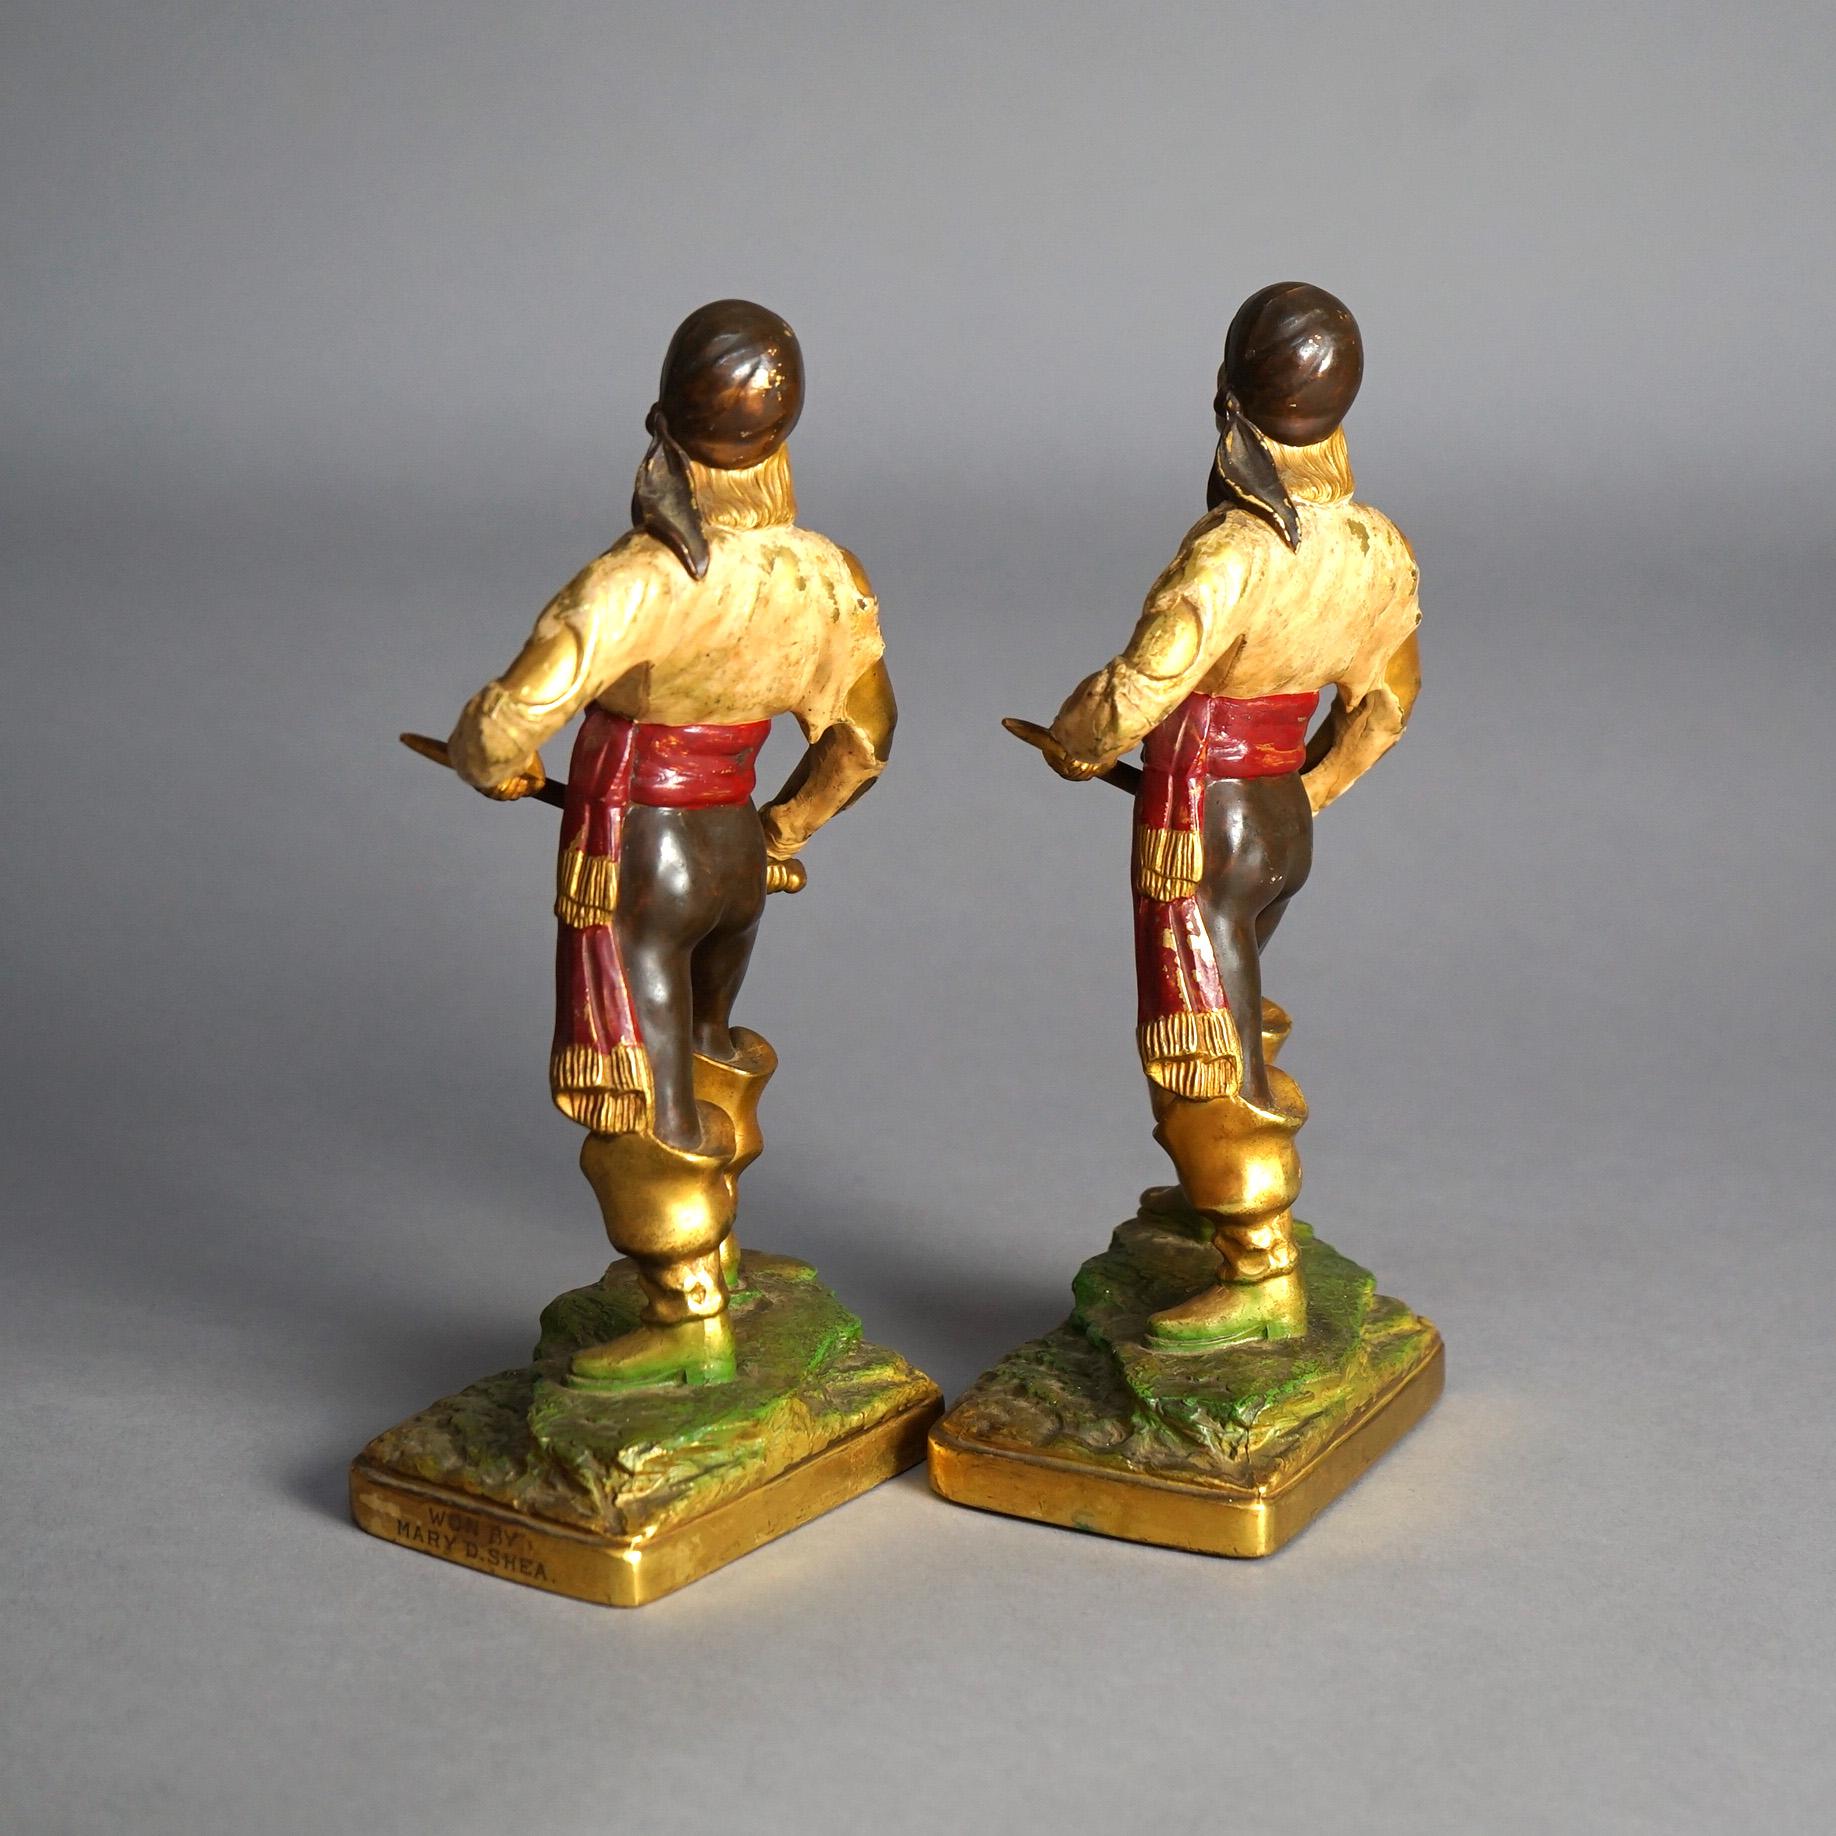 Antique Pair of Polychrome & Bronzed Cast Metal Pirate Figures Circa 1930 For Sale 3